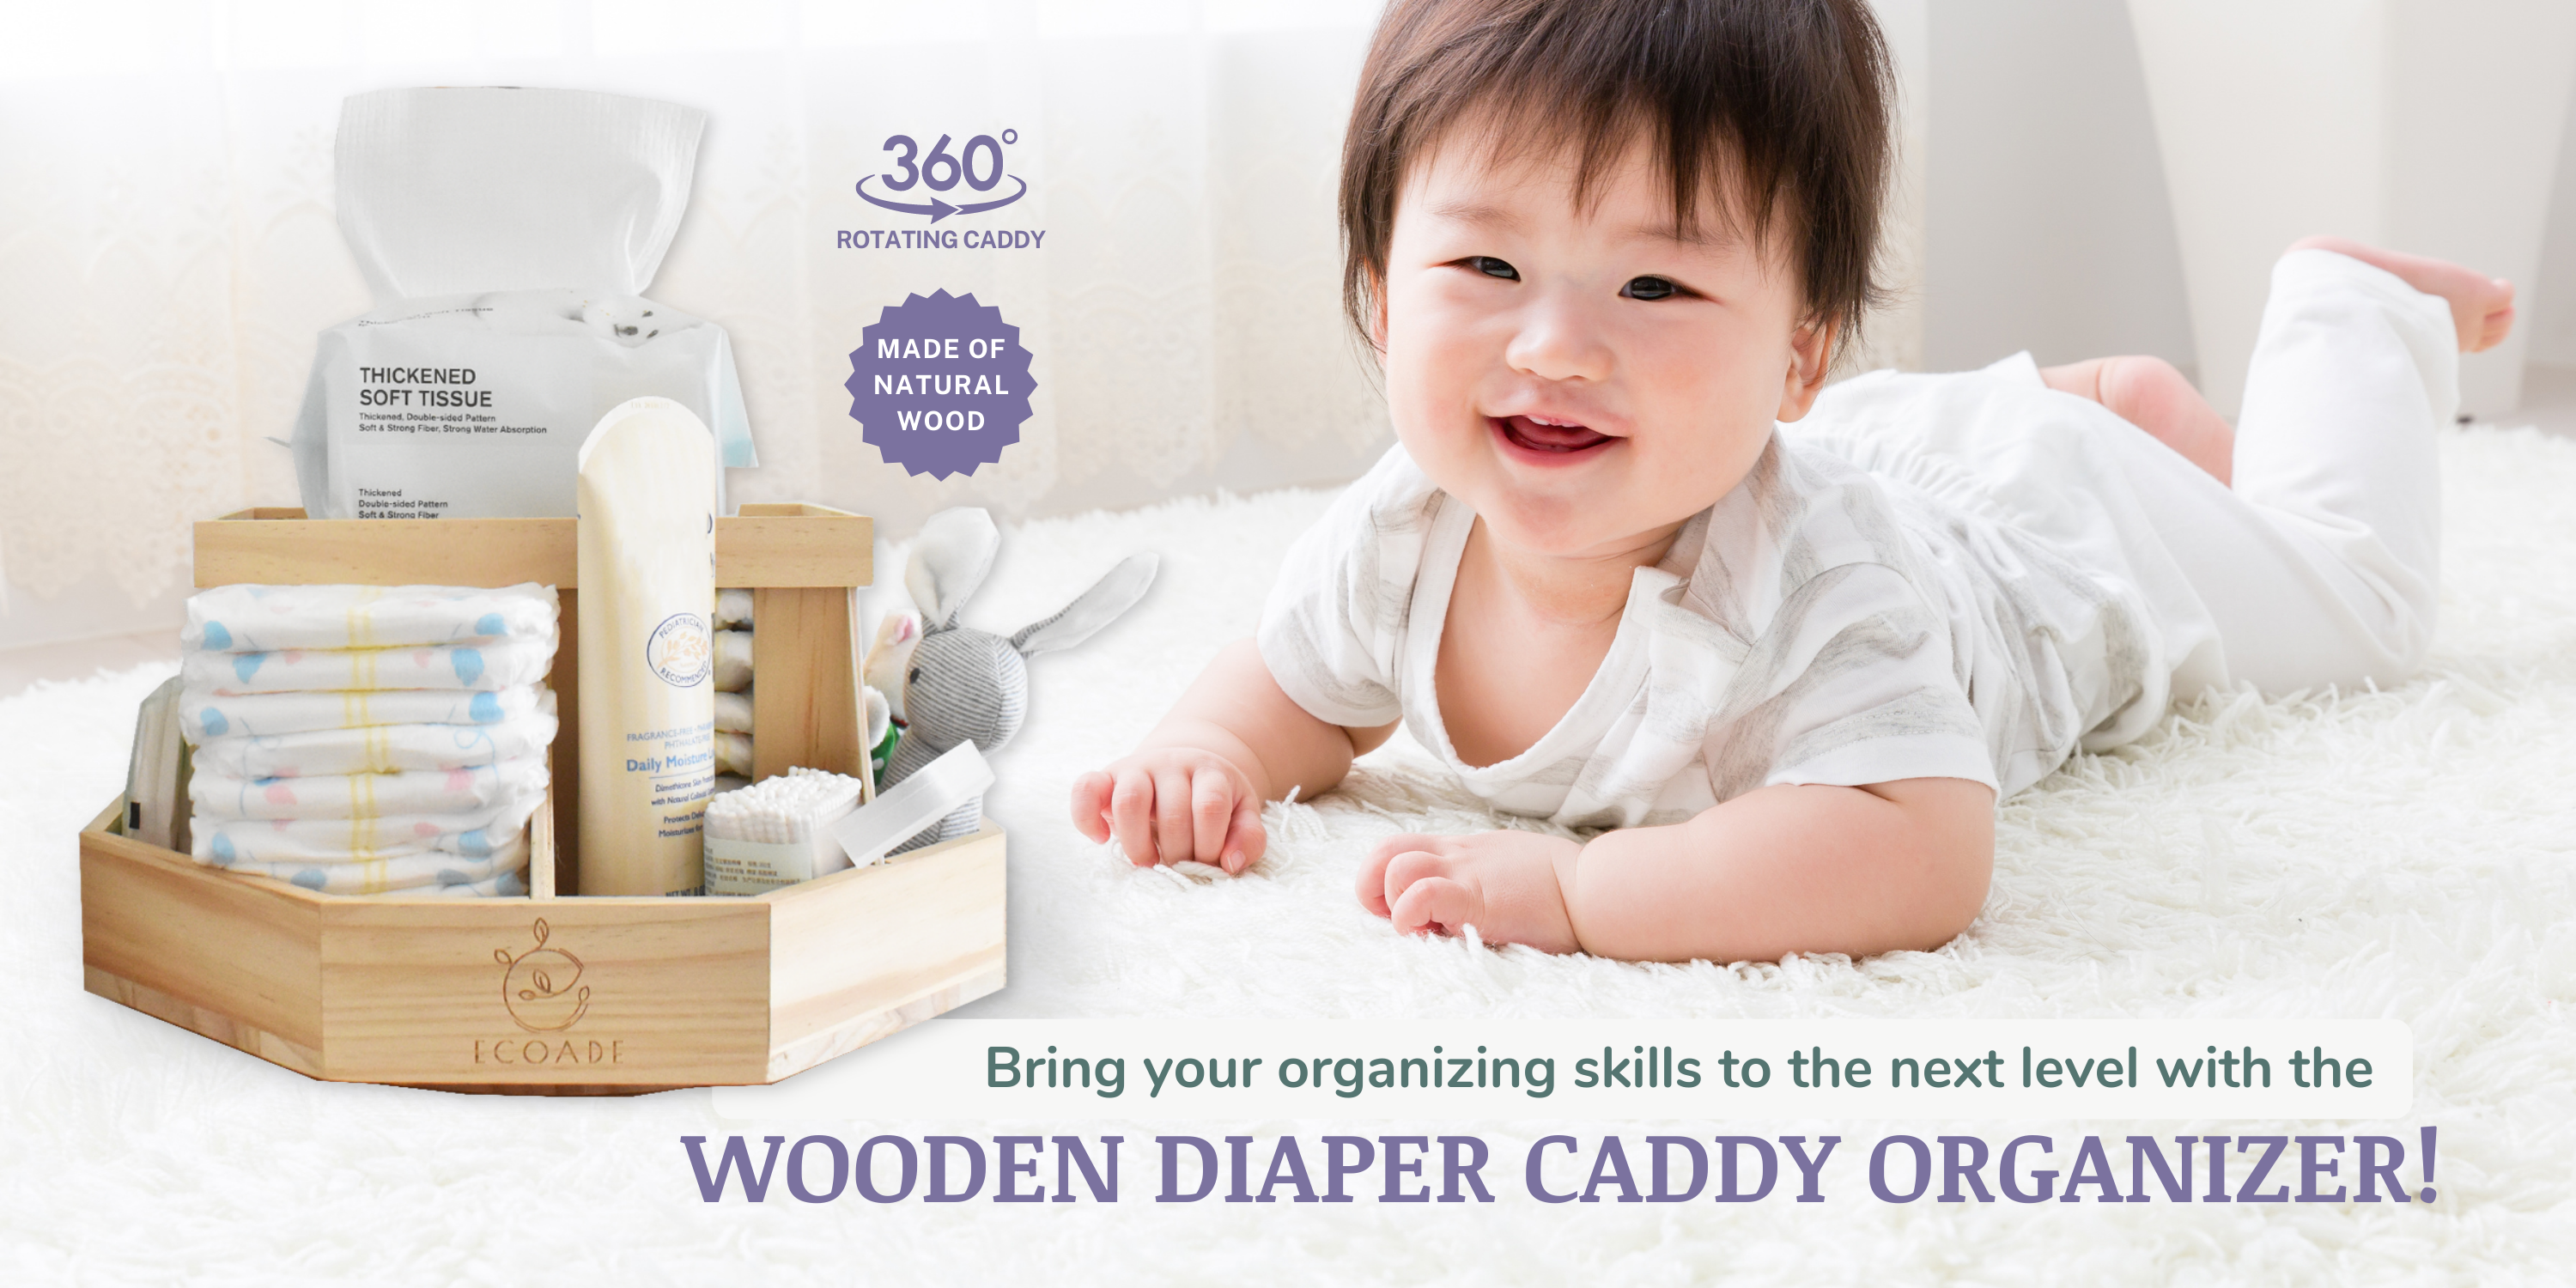 Load video: How to Assemble - Wooden Diaper Caddy Organizer - 360 Degrees Rotating Caddy with Removable Dividers, Nursery Diaper Organizer